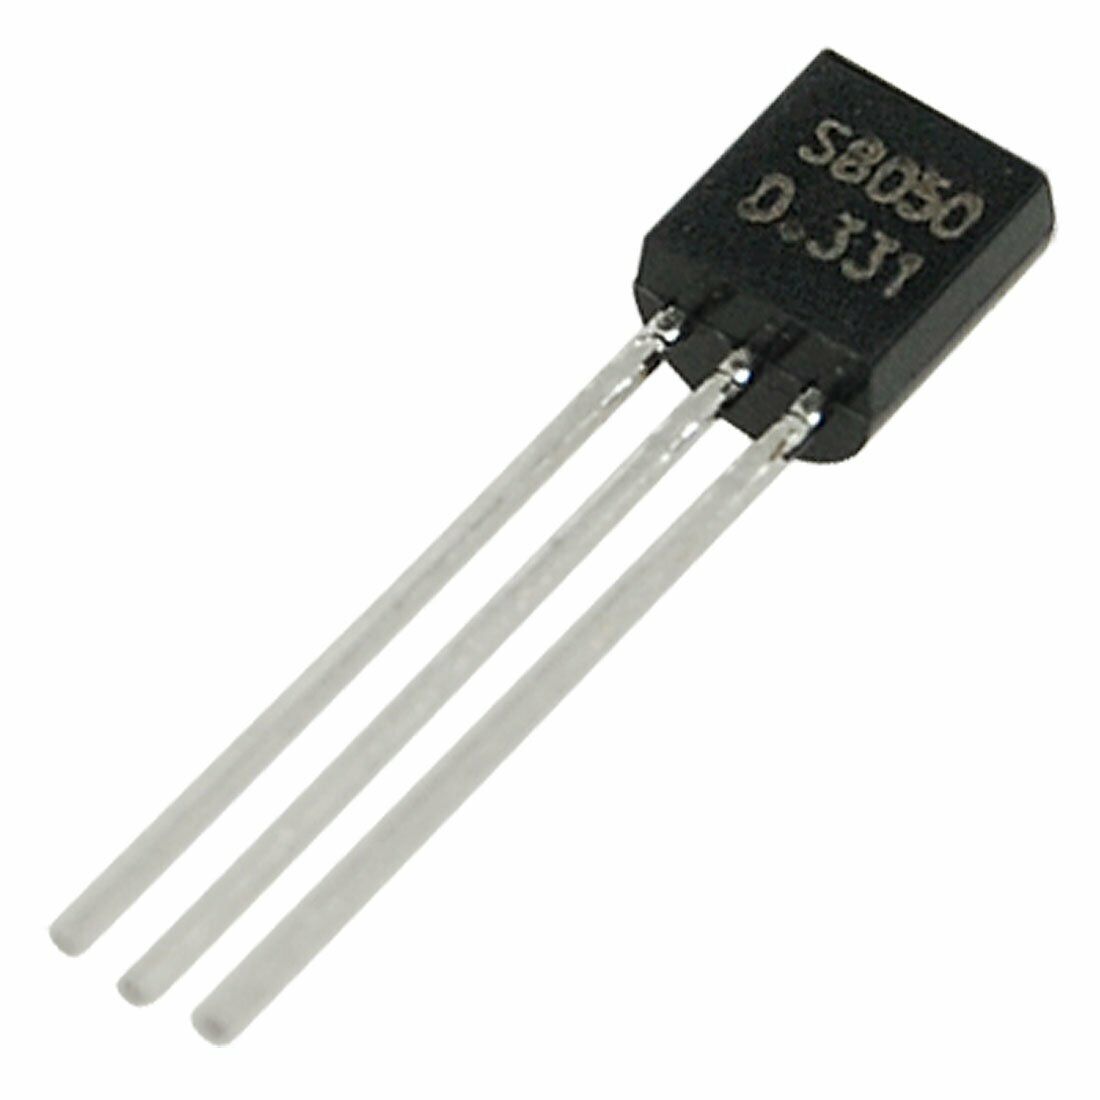 S8050 NPN Silicon Transistor Low Voltage High Current Small Signal